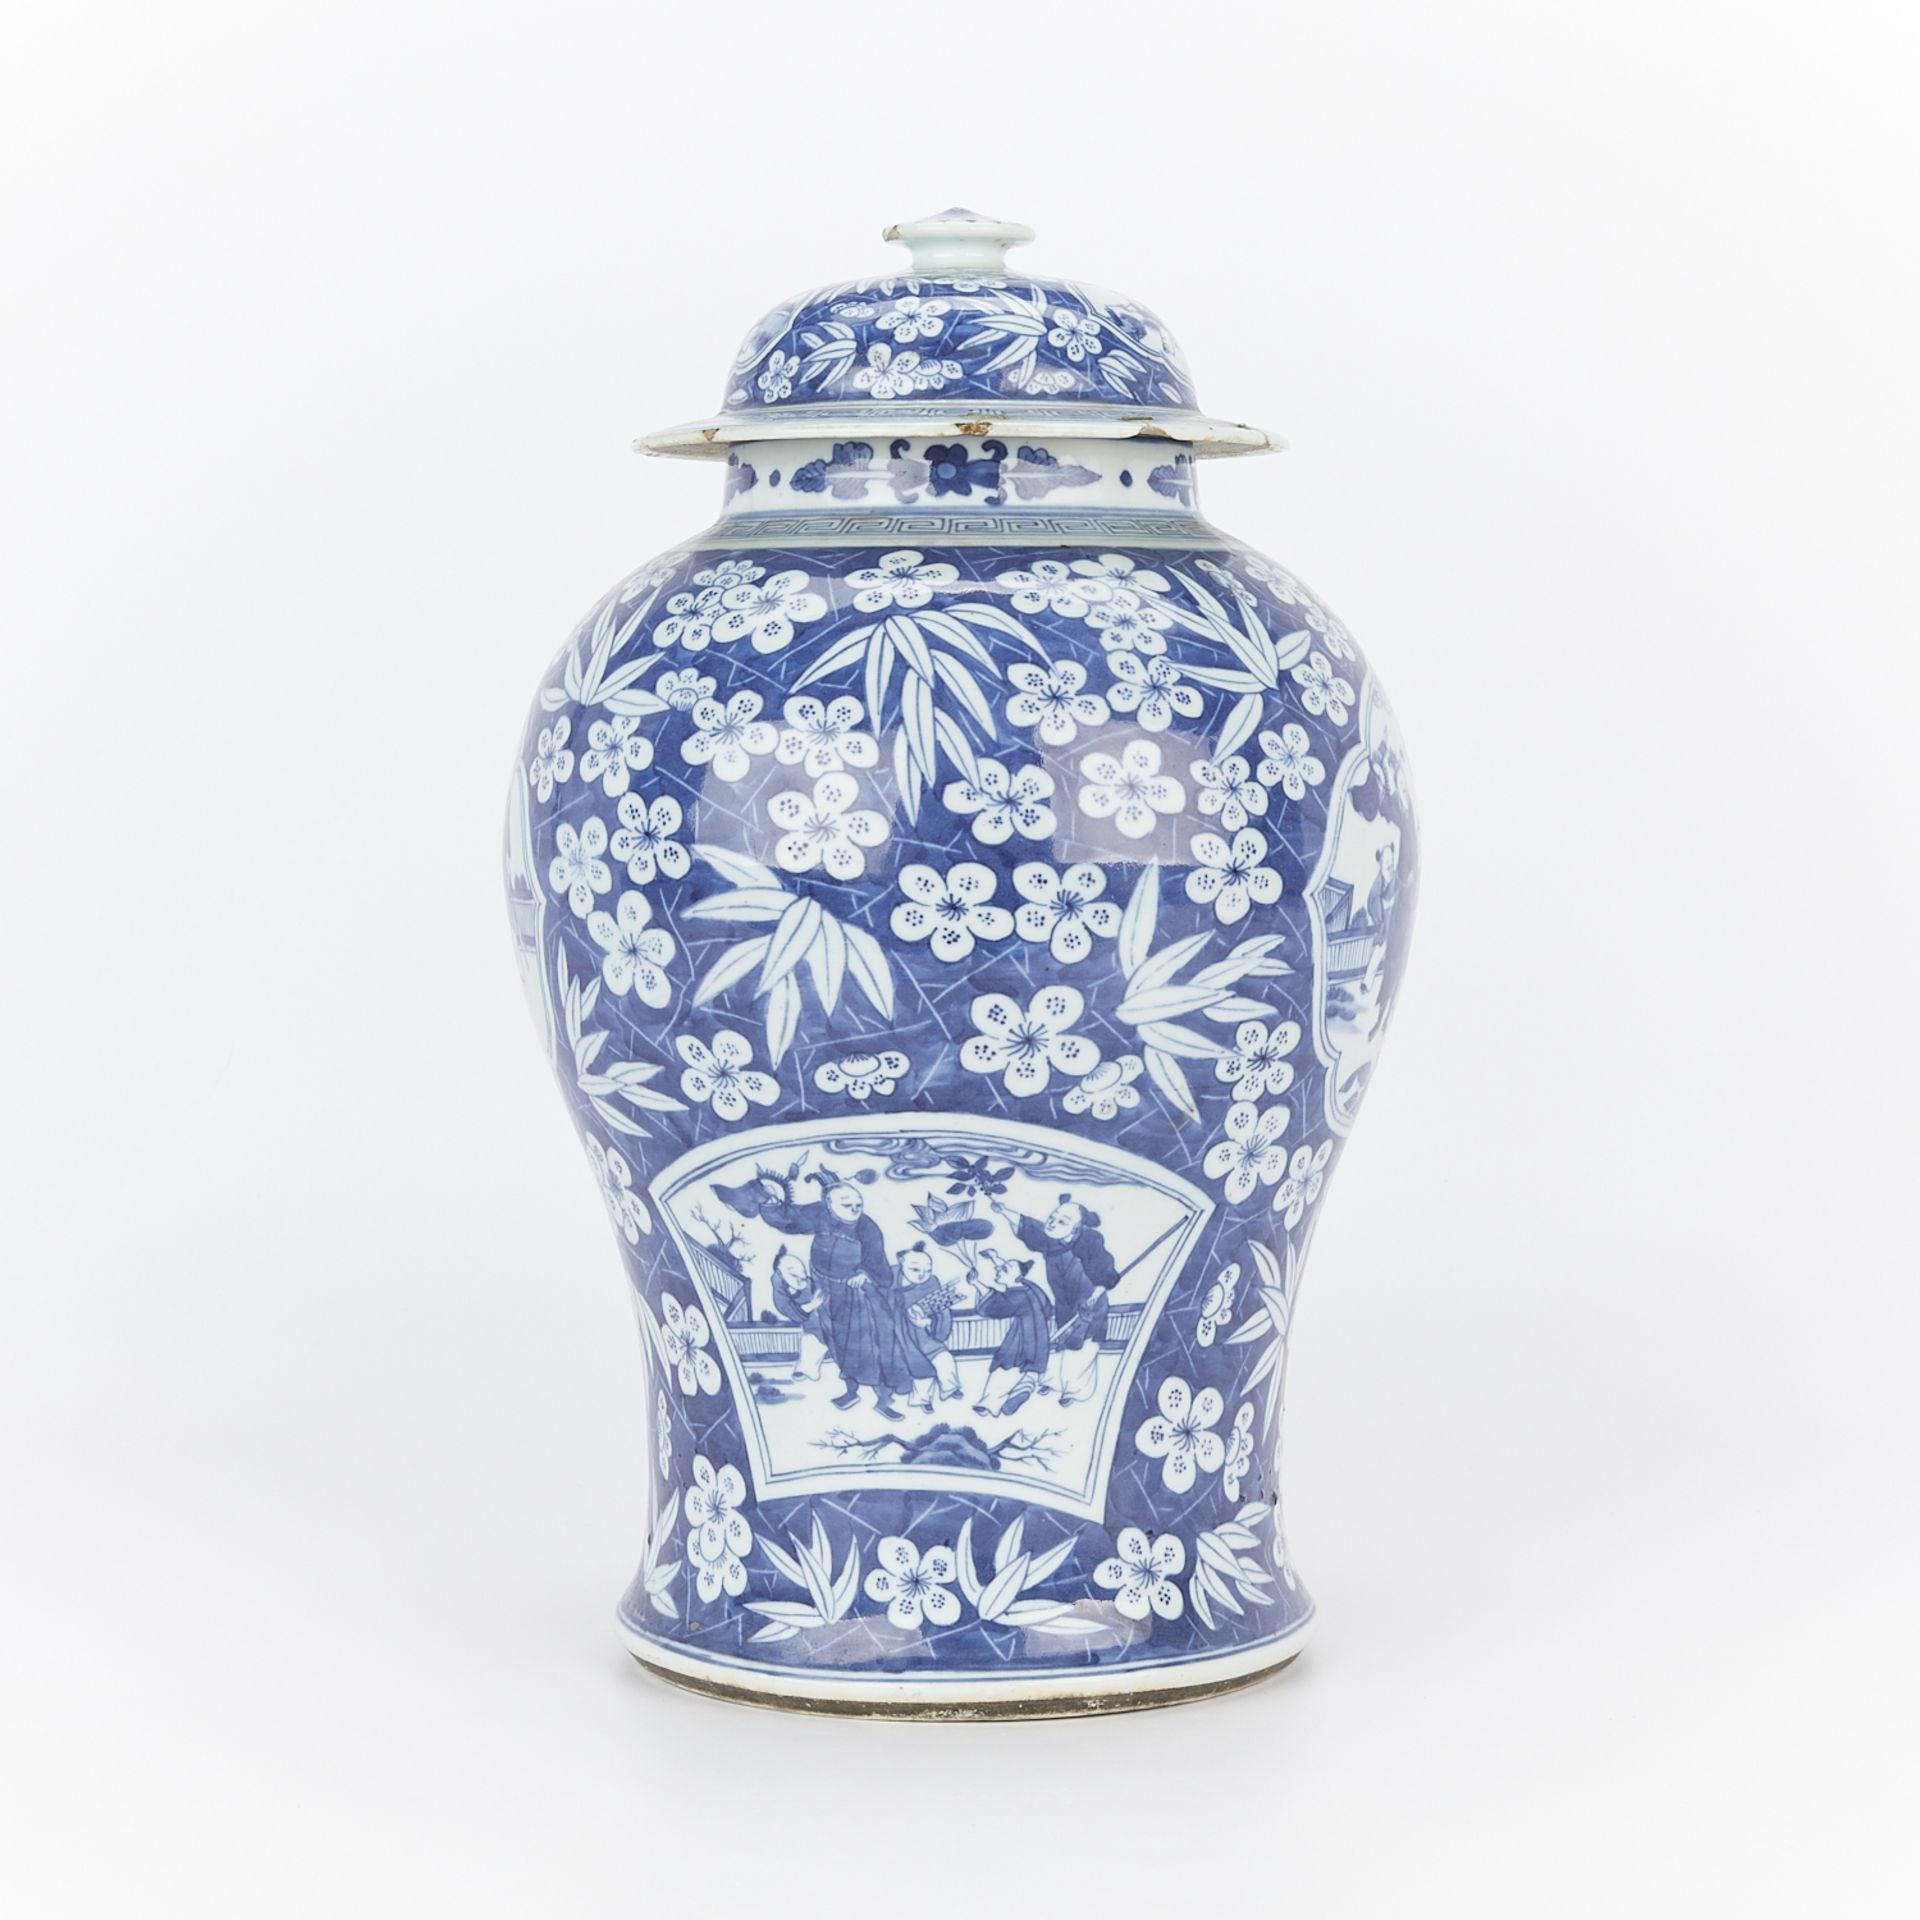 18th/19th c. Chinese B&W Porcelain Baluster Vase - Image 4 of 15